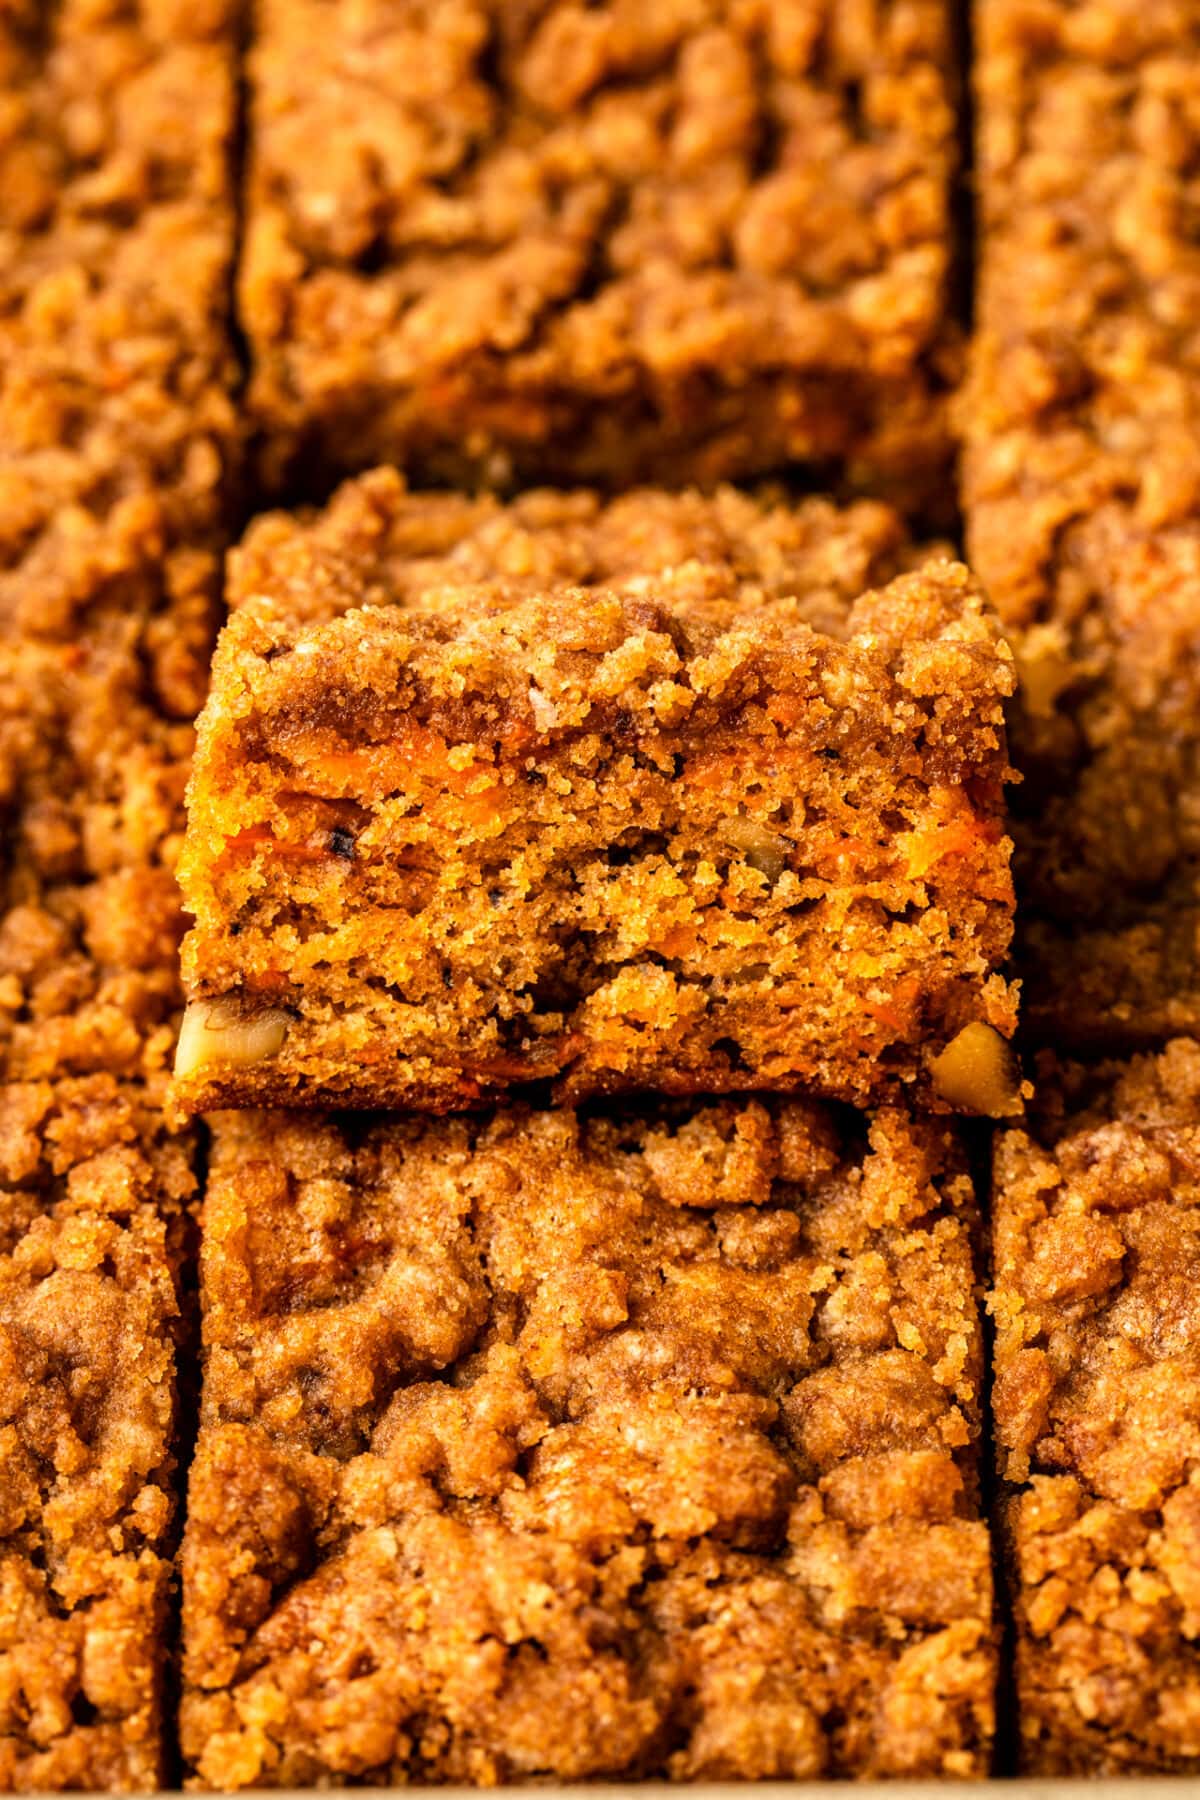 a zoomed in image of a slice of carrot cake coffee cake in a baking tray full of freshly baked slices of cake